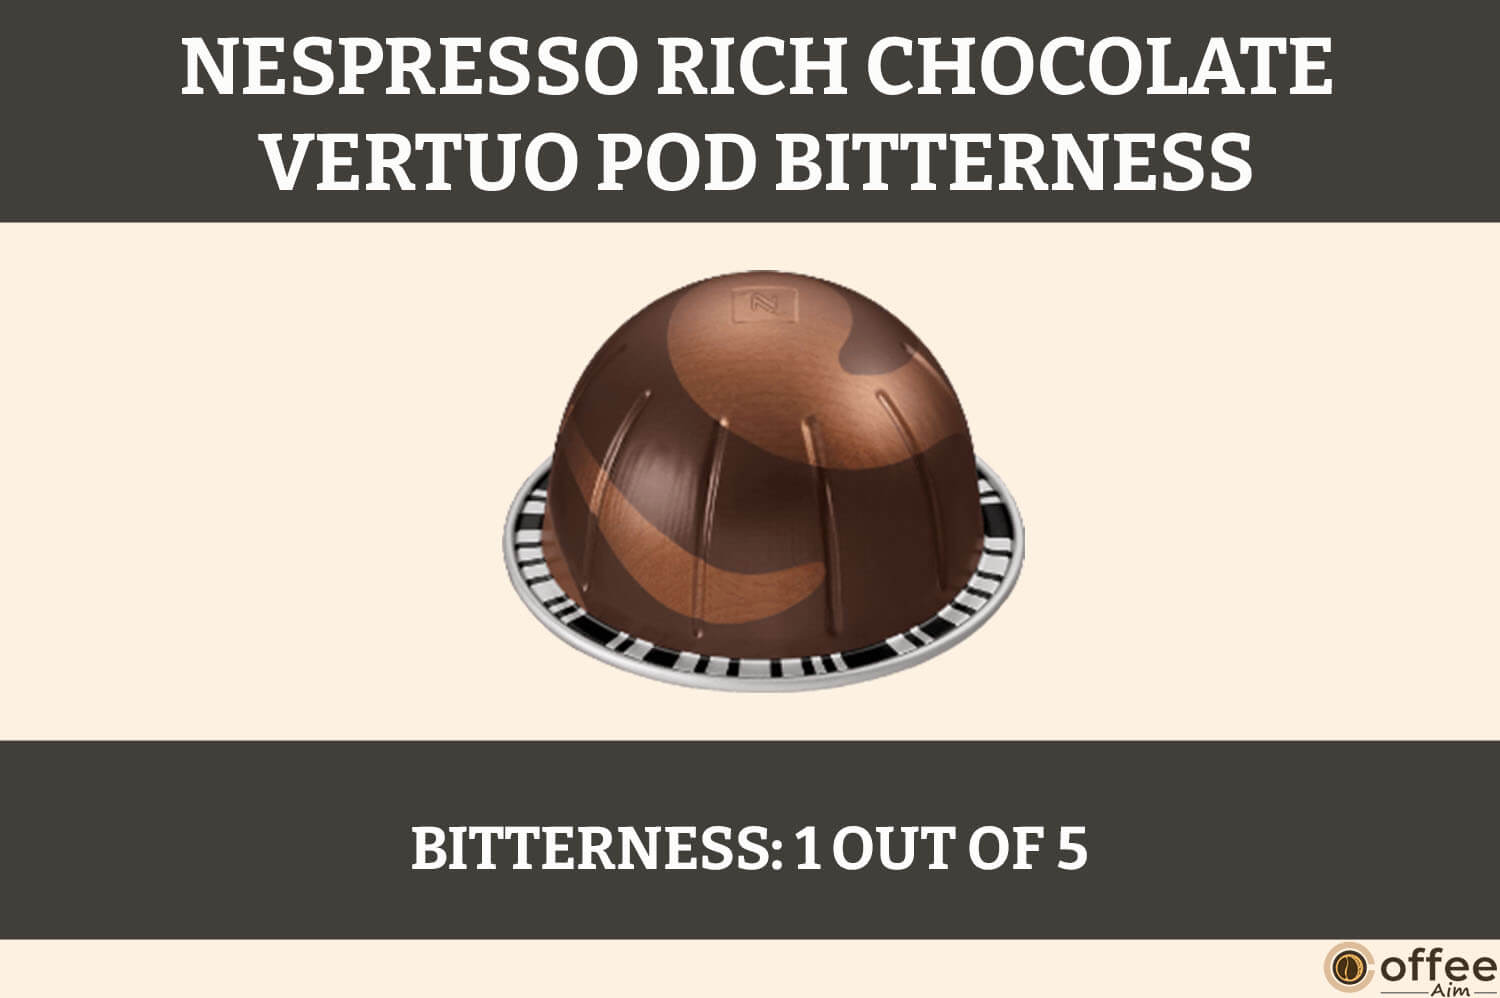 Nespresso Rich Chocolate Vertuo Pod - Illustration for 'Nespresso Rich Chocolate Vertuo Pod Review' article, highlighting its bitterness.